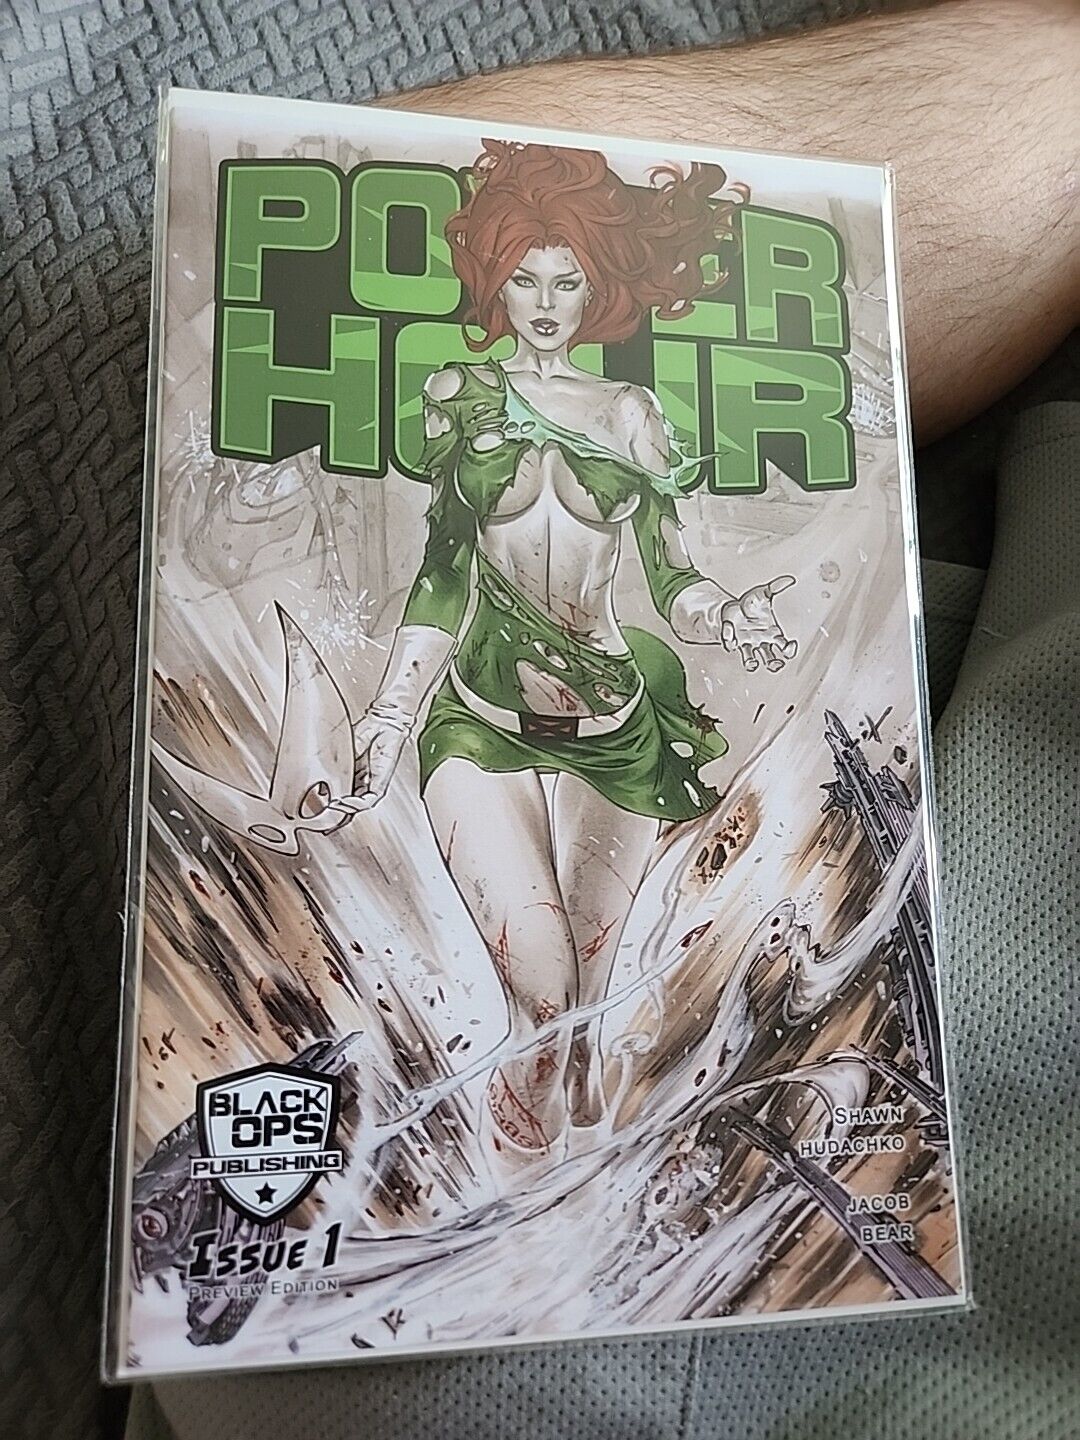 Power Hour Preview #1 Poison Ivy Cosplay Variant EBAS Black Ops